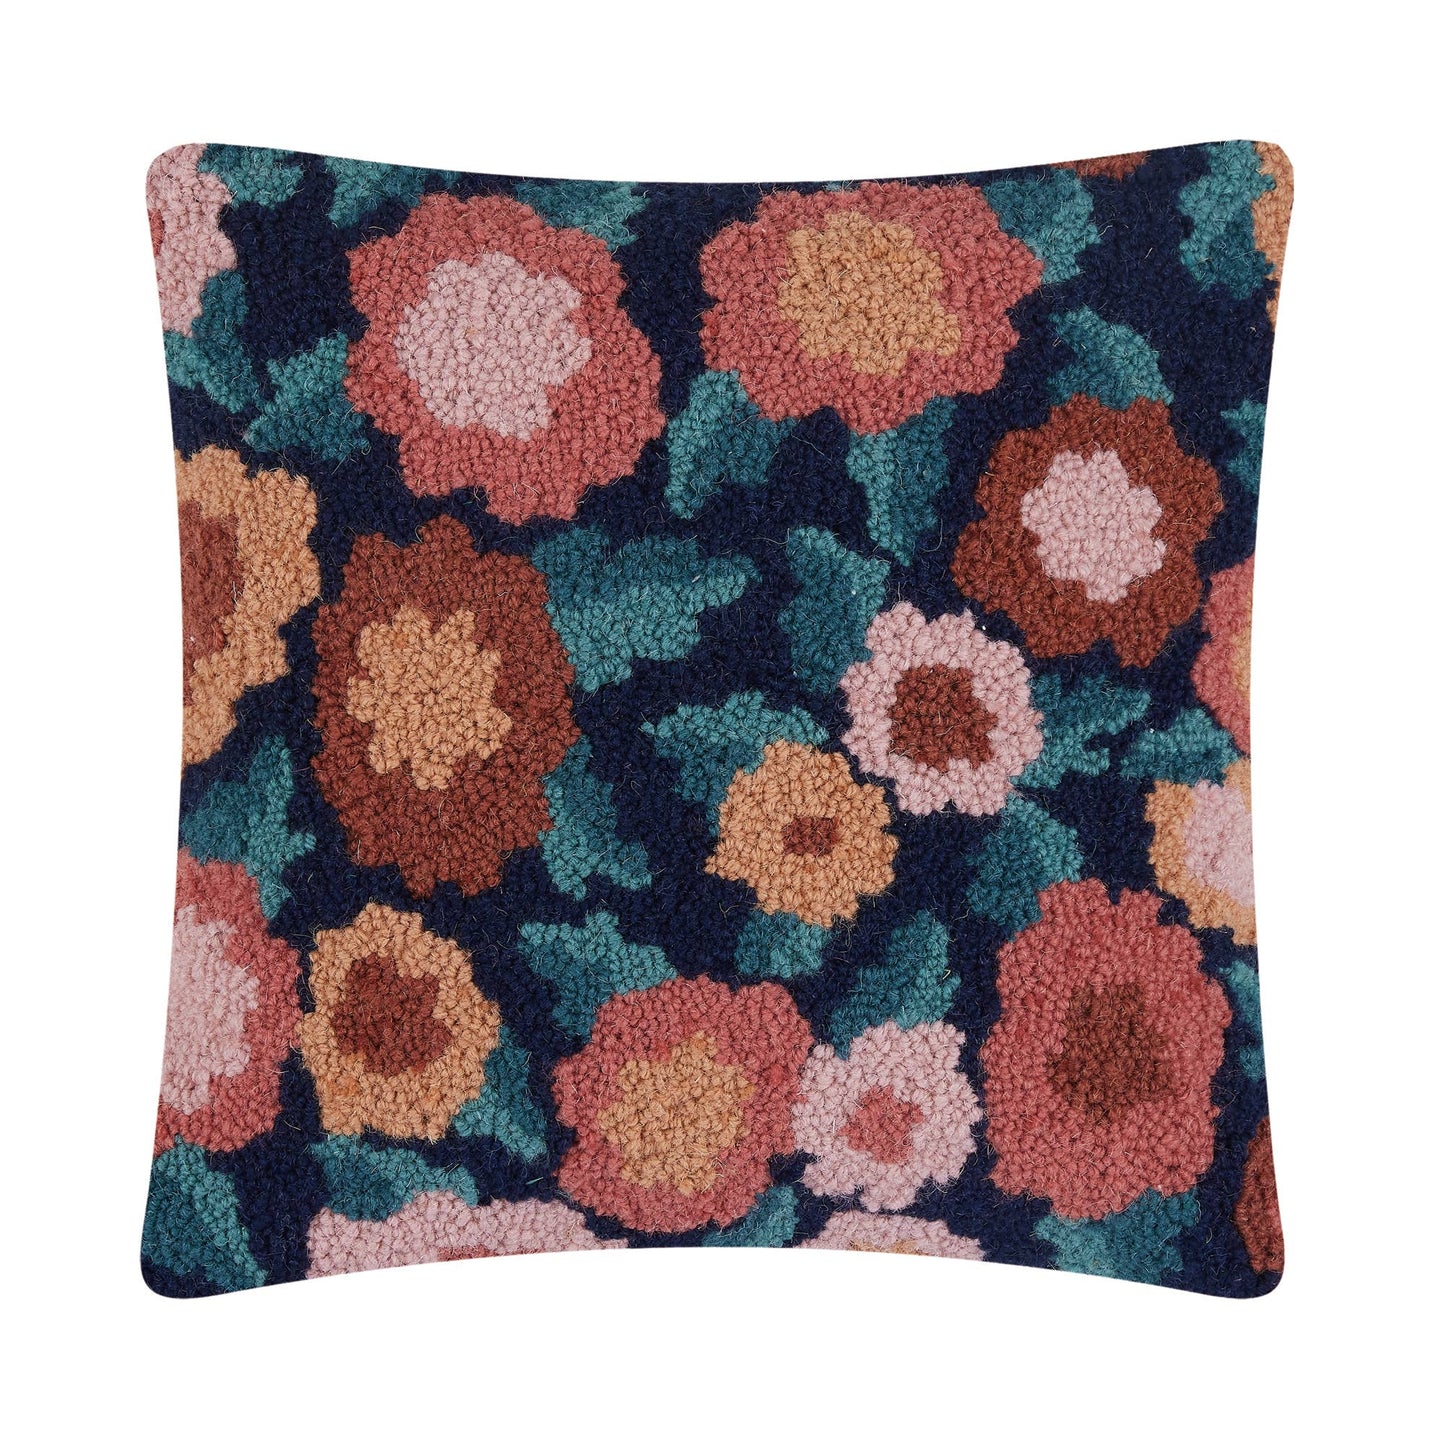 Suzy Floral Pillow - Midnight